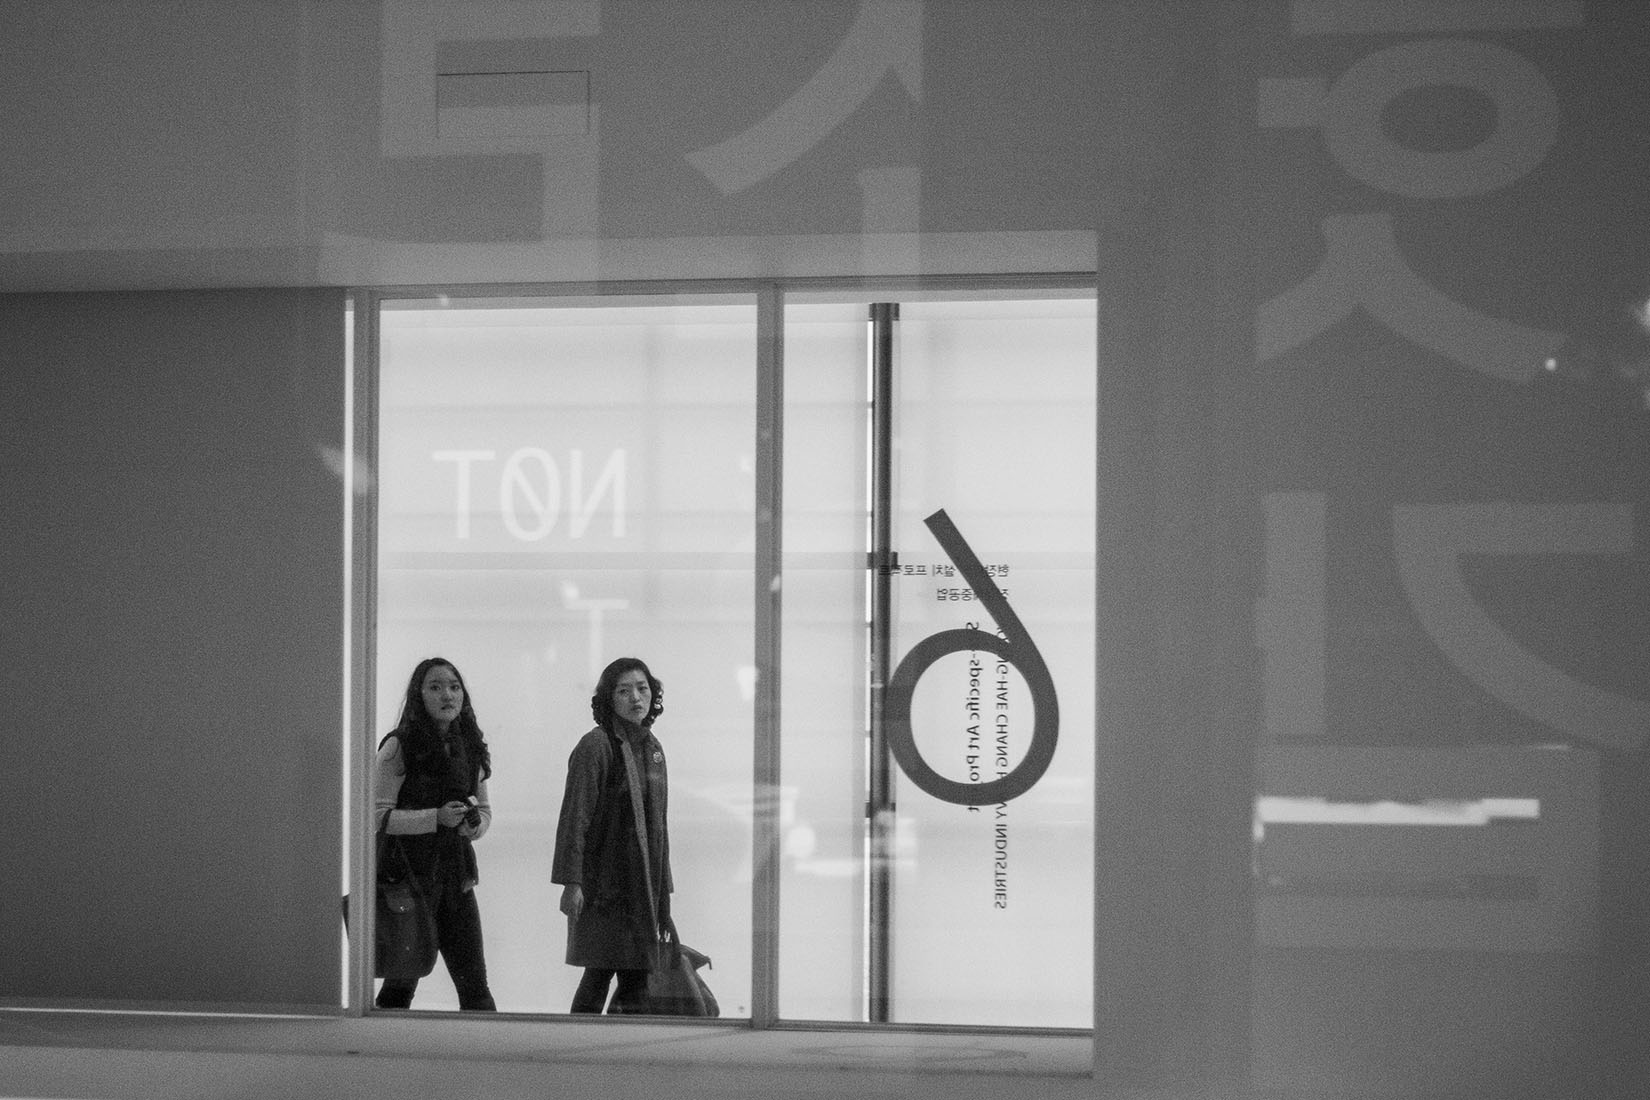 Jeunes femmes, reflets typographiques, projection de caractères, National Museum of Modern and Contemporary Art, Séoul, Young-Hae Chang Heavy Industries